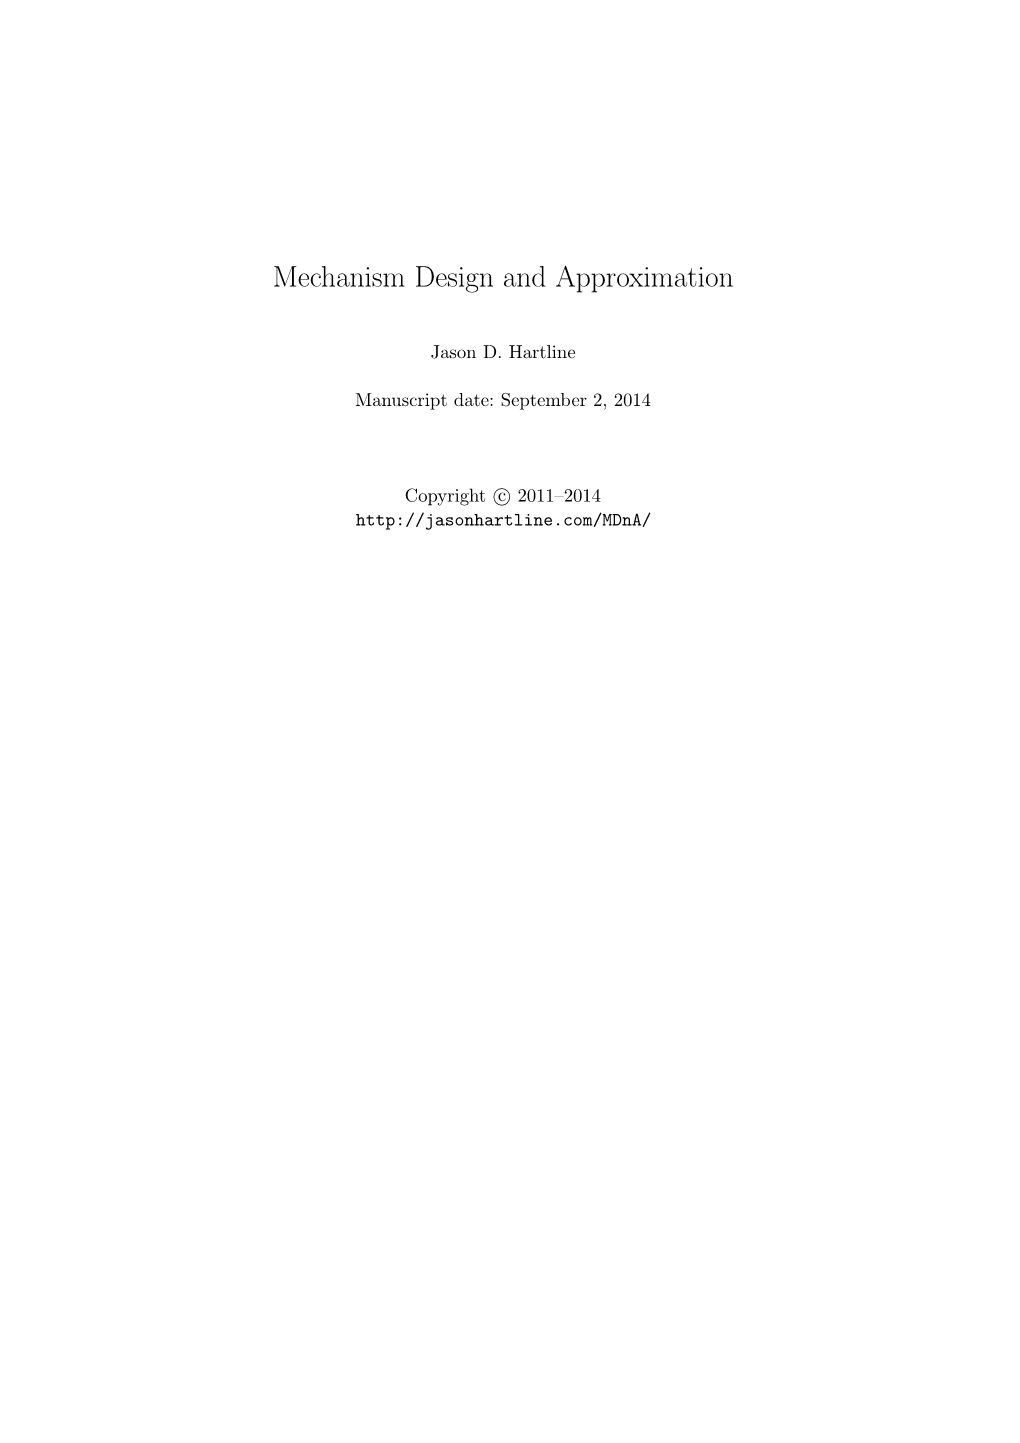 Mechanism Design and Approximation